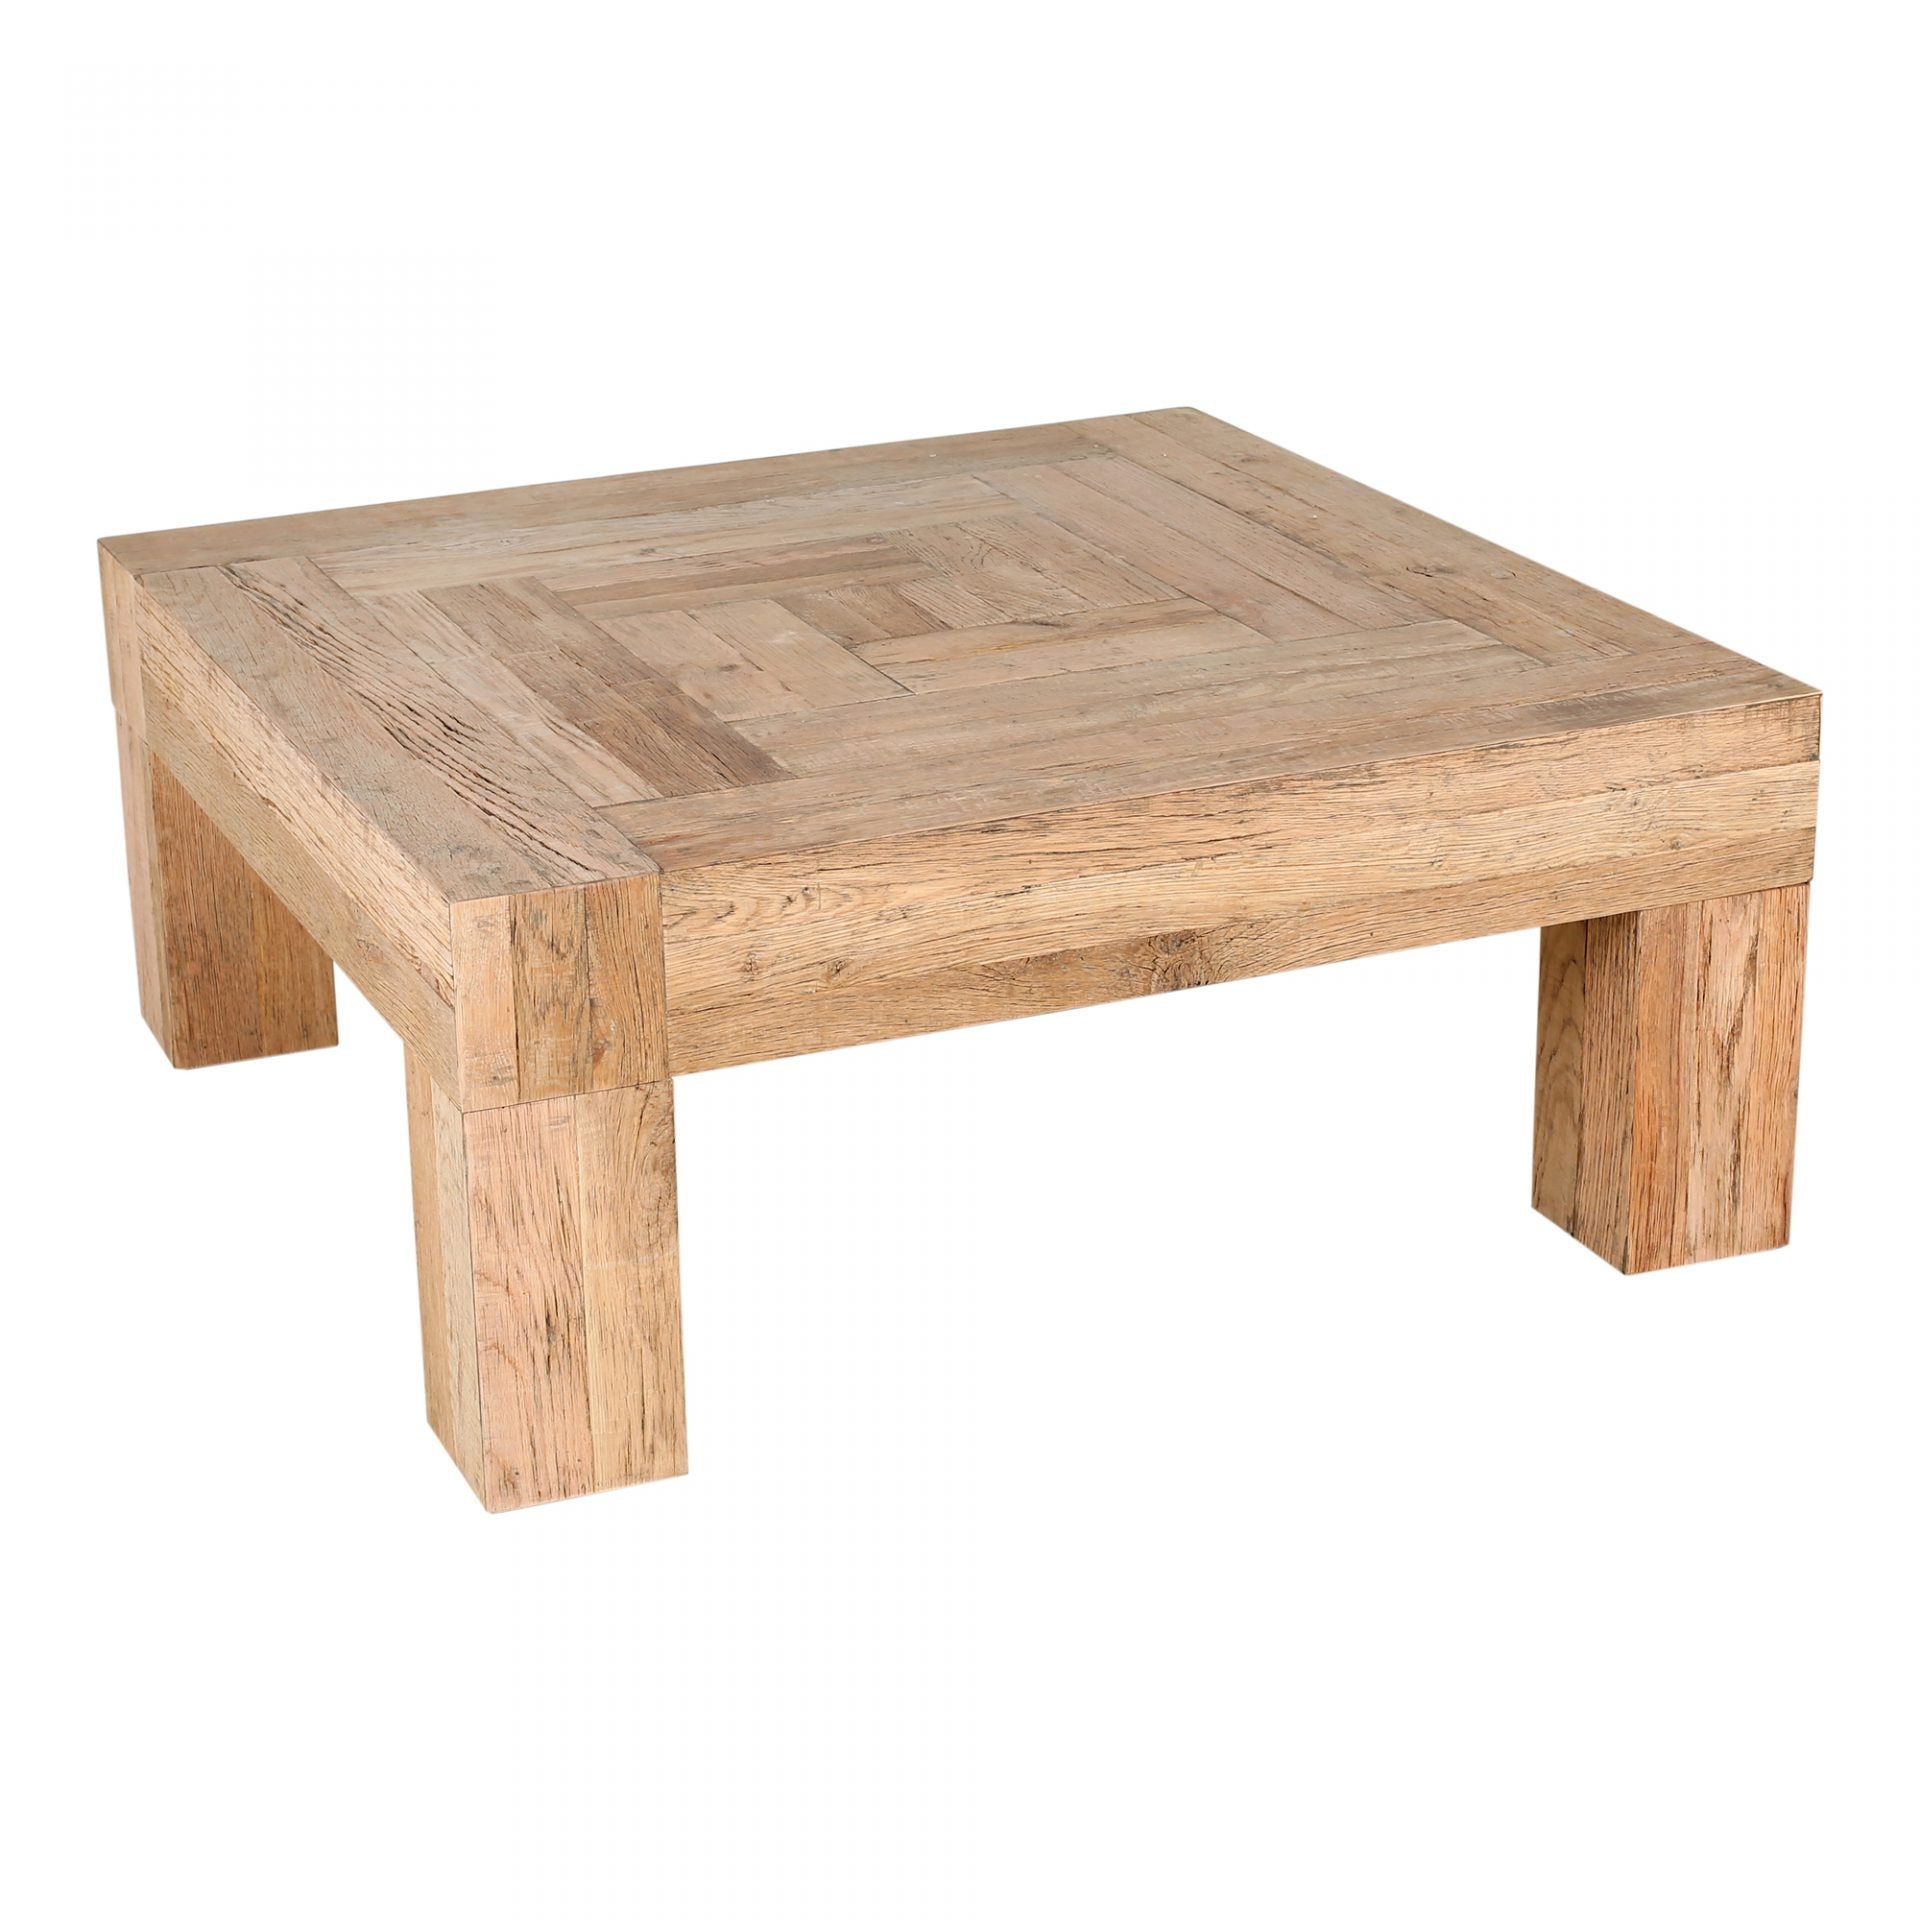 Formed from solid reclaimed oak, the Evander Coffee Table features wild grains and knots, producing a unique surface alongside its modern, blocked construction. We'd love to see this featured in your living room, lounge area, or others space!  Dimensions: 39.5"W x 39.5"D x 16.5"H  Materials:  Solid Reclaimed Oak Frame, Oak Veneer over Plywood